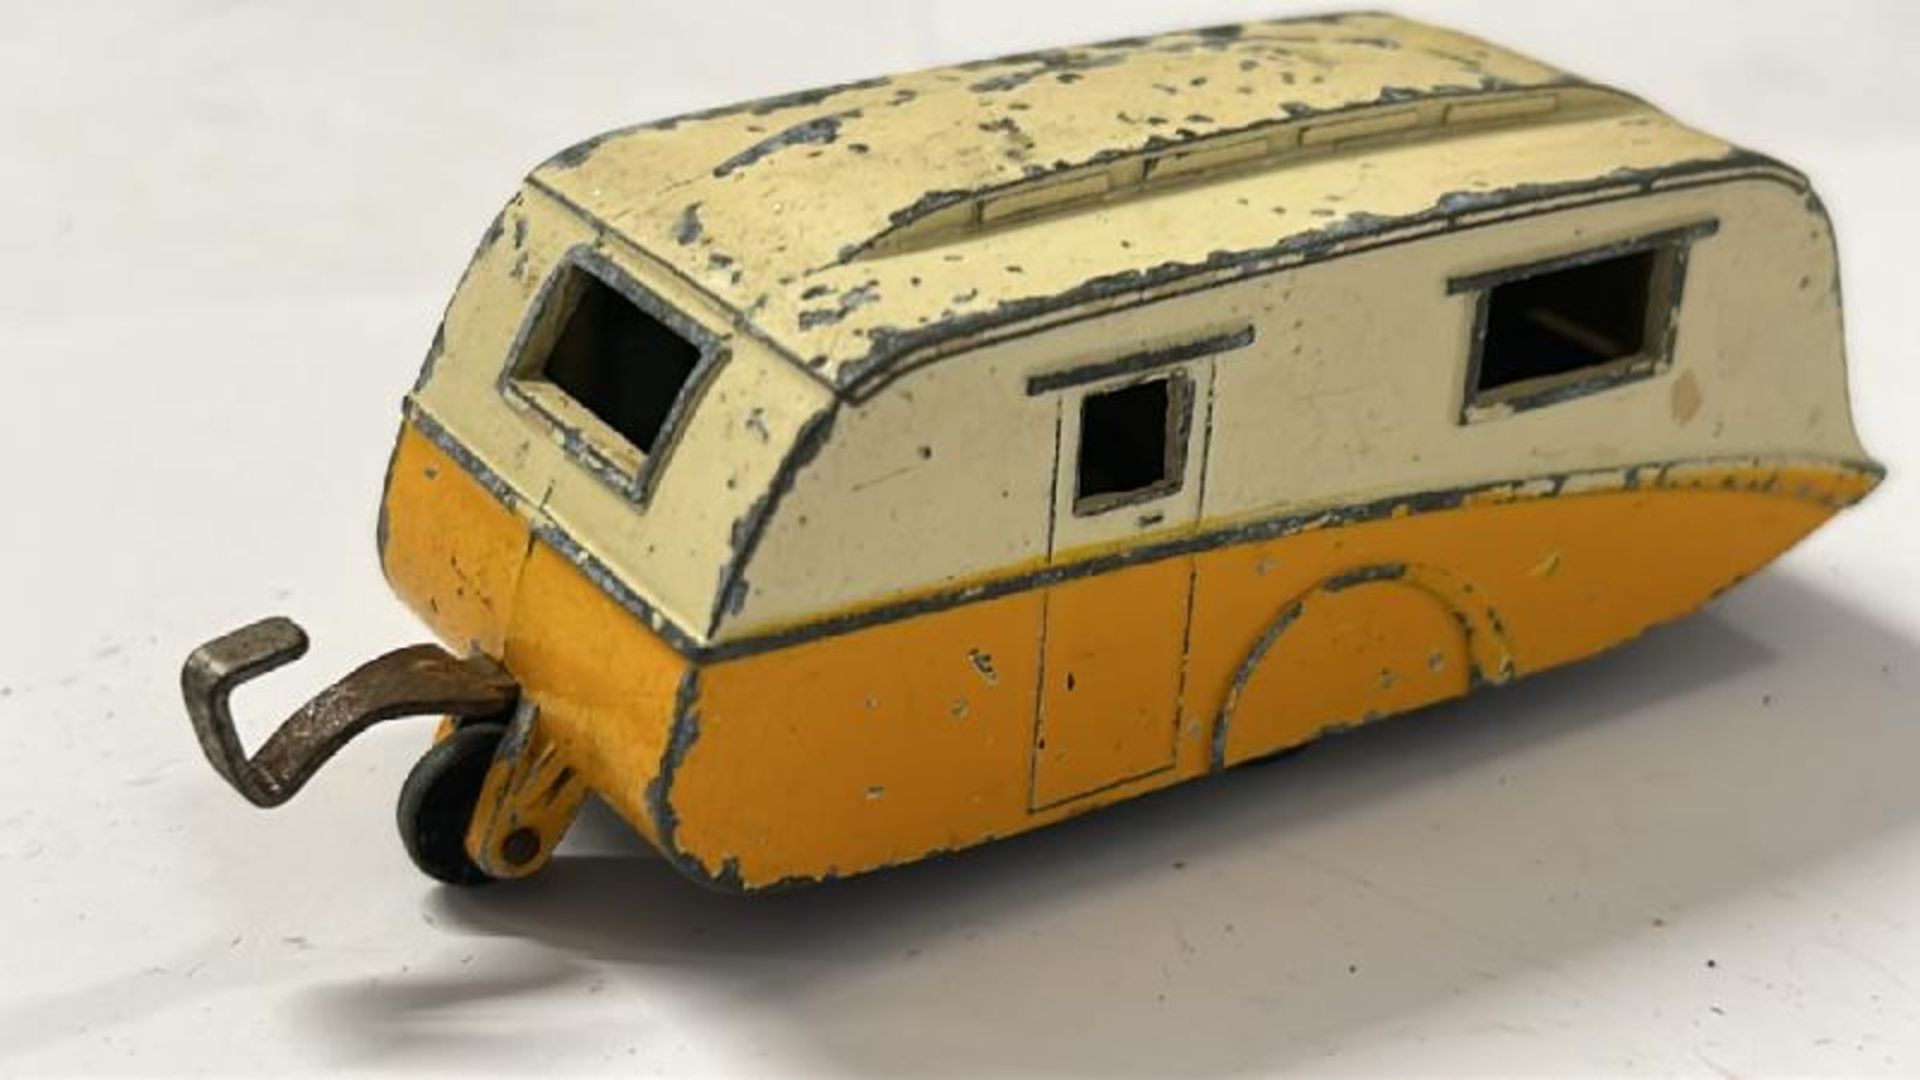 Unboxed Dinky & Corgi cars and caravans including Corgi Silver Shadow Rolls Royce and Dinky Rolls - Image 18 of 23